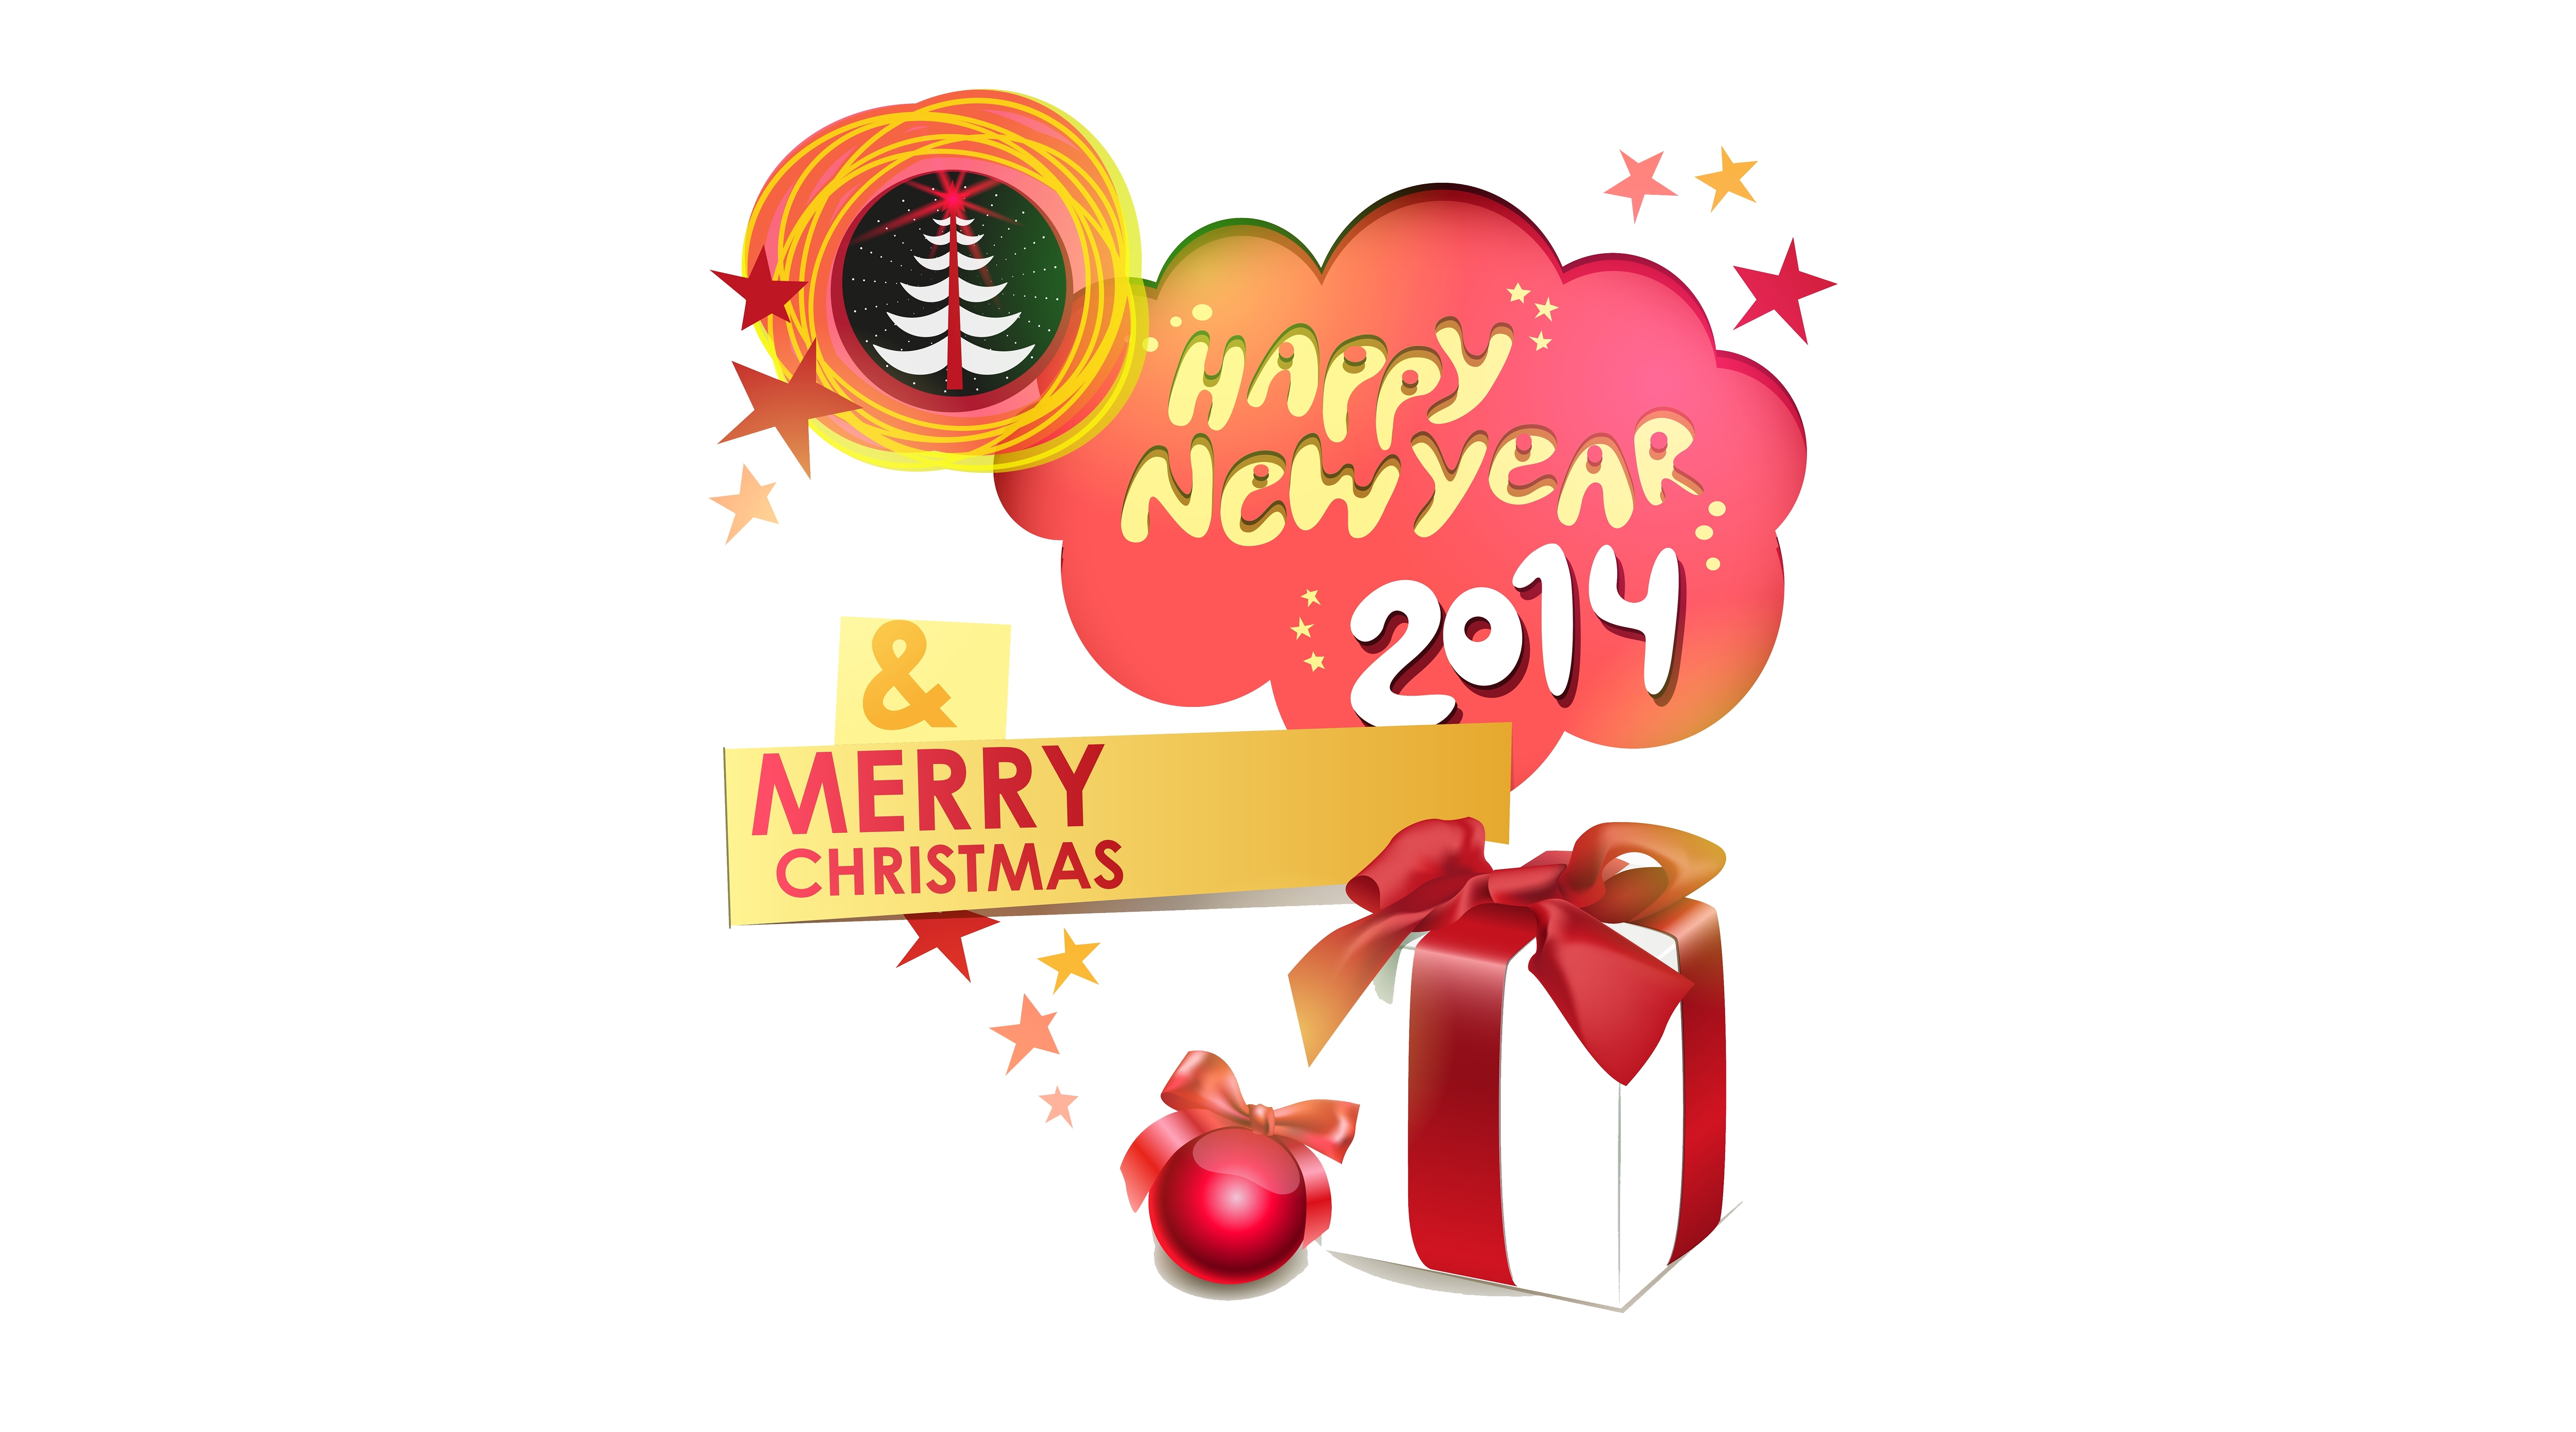 Happy New Year and Merry Christmas 2014 wallpapers and images